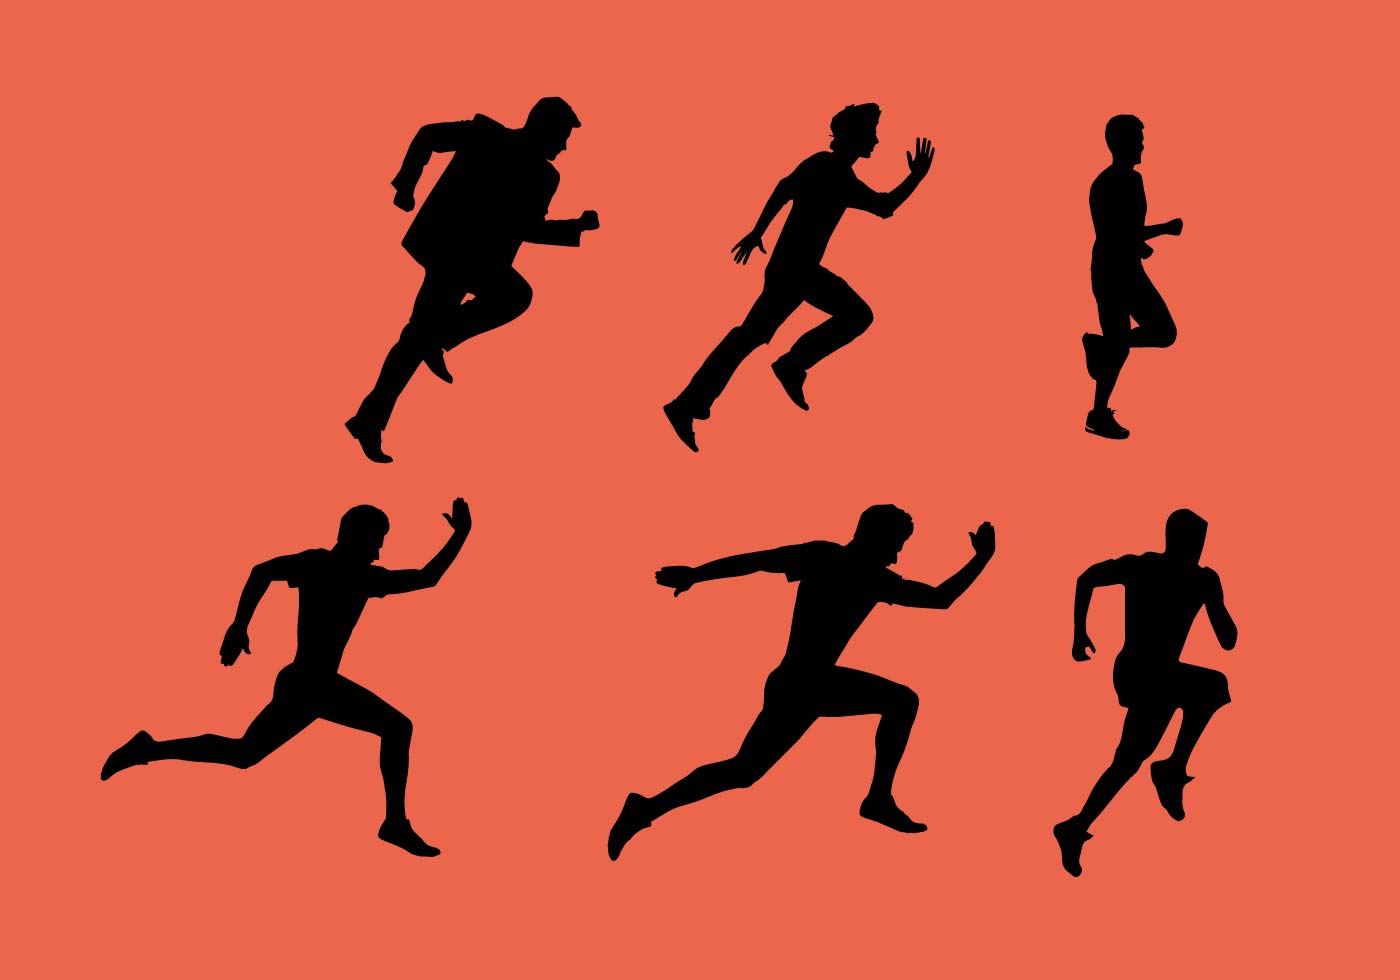 Download Man Running Vector Sequence - Download Free Vector Art, Stock Graphics & Images